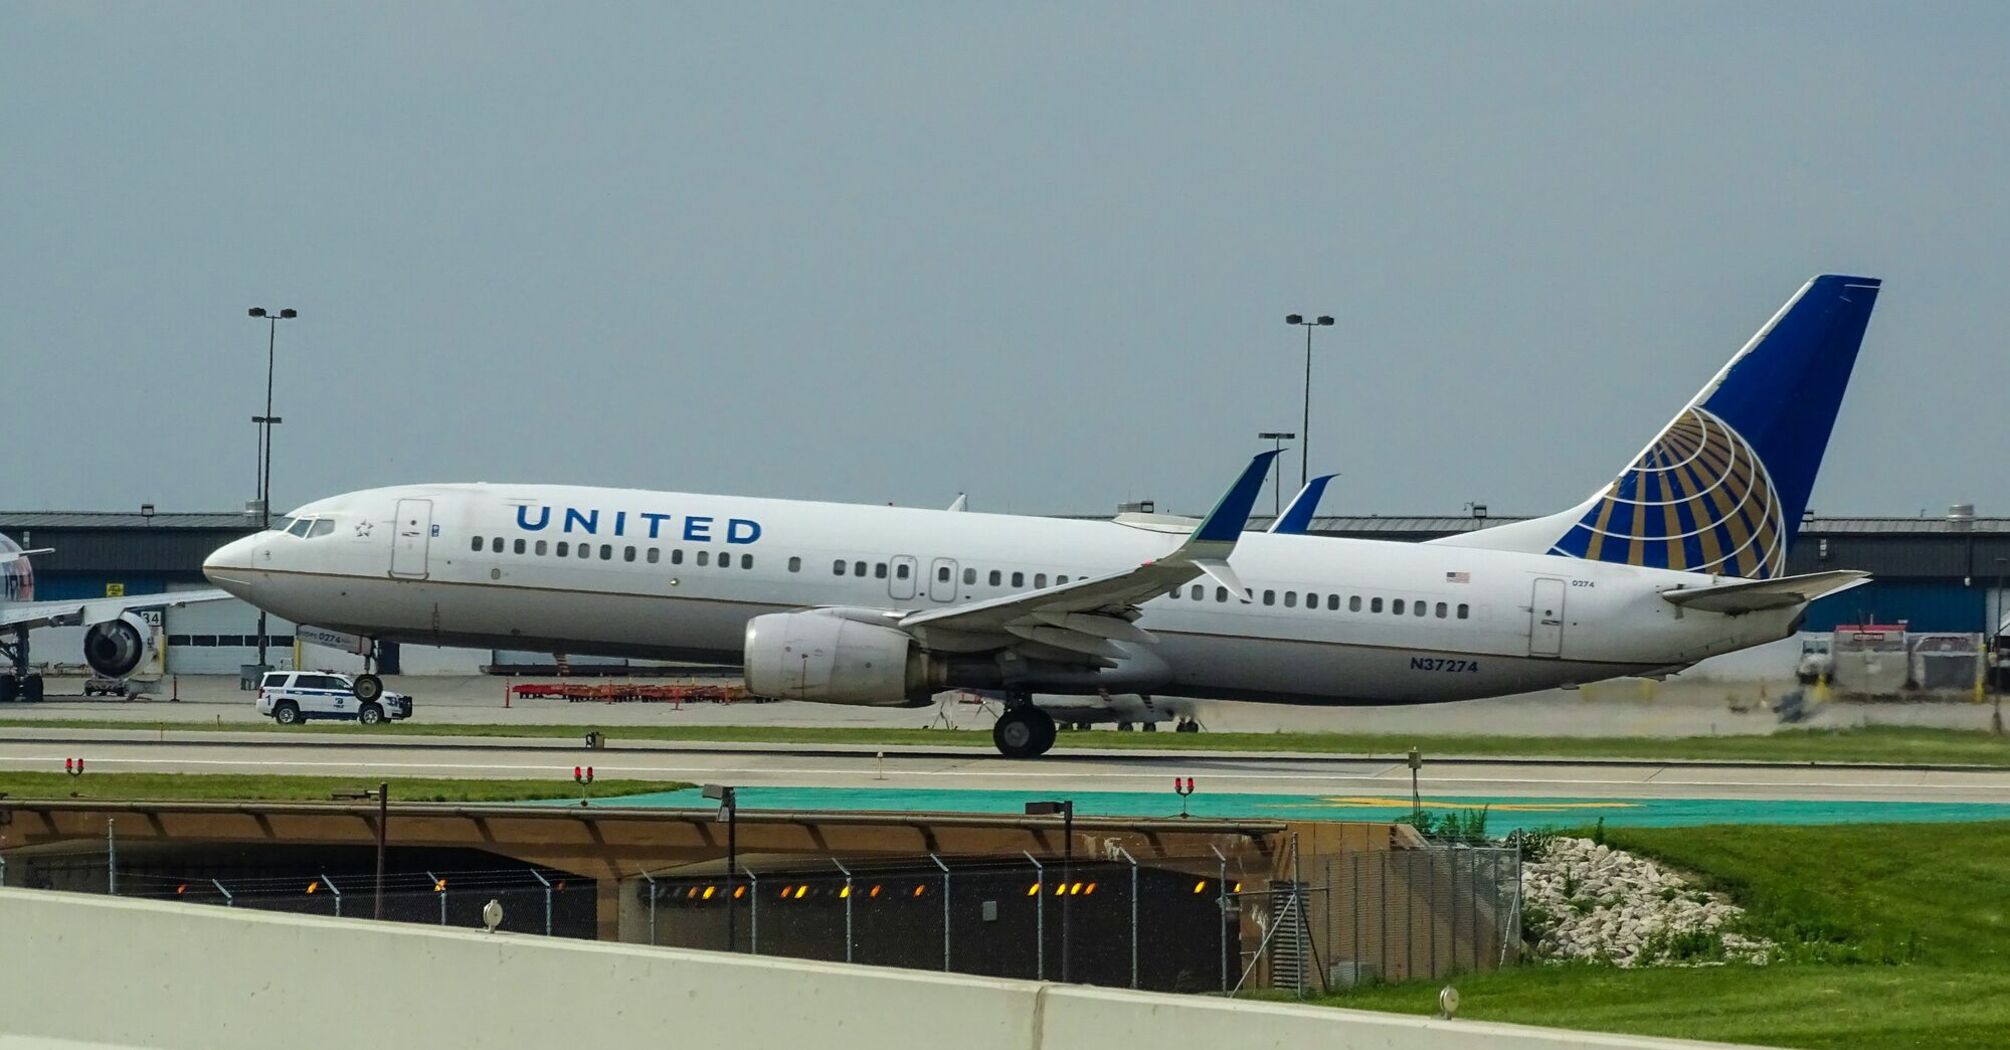 United airlines at the airport